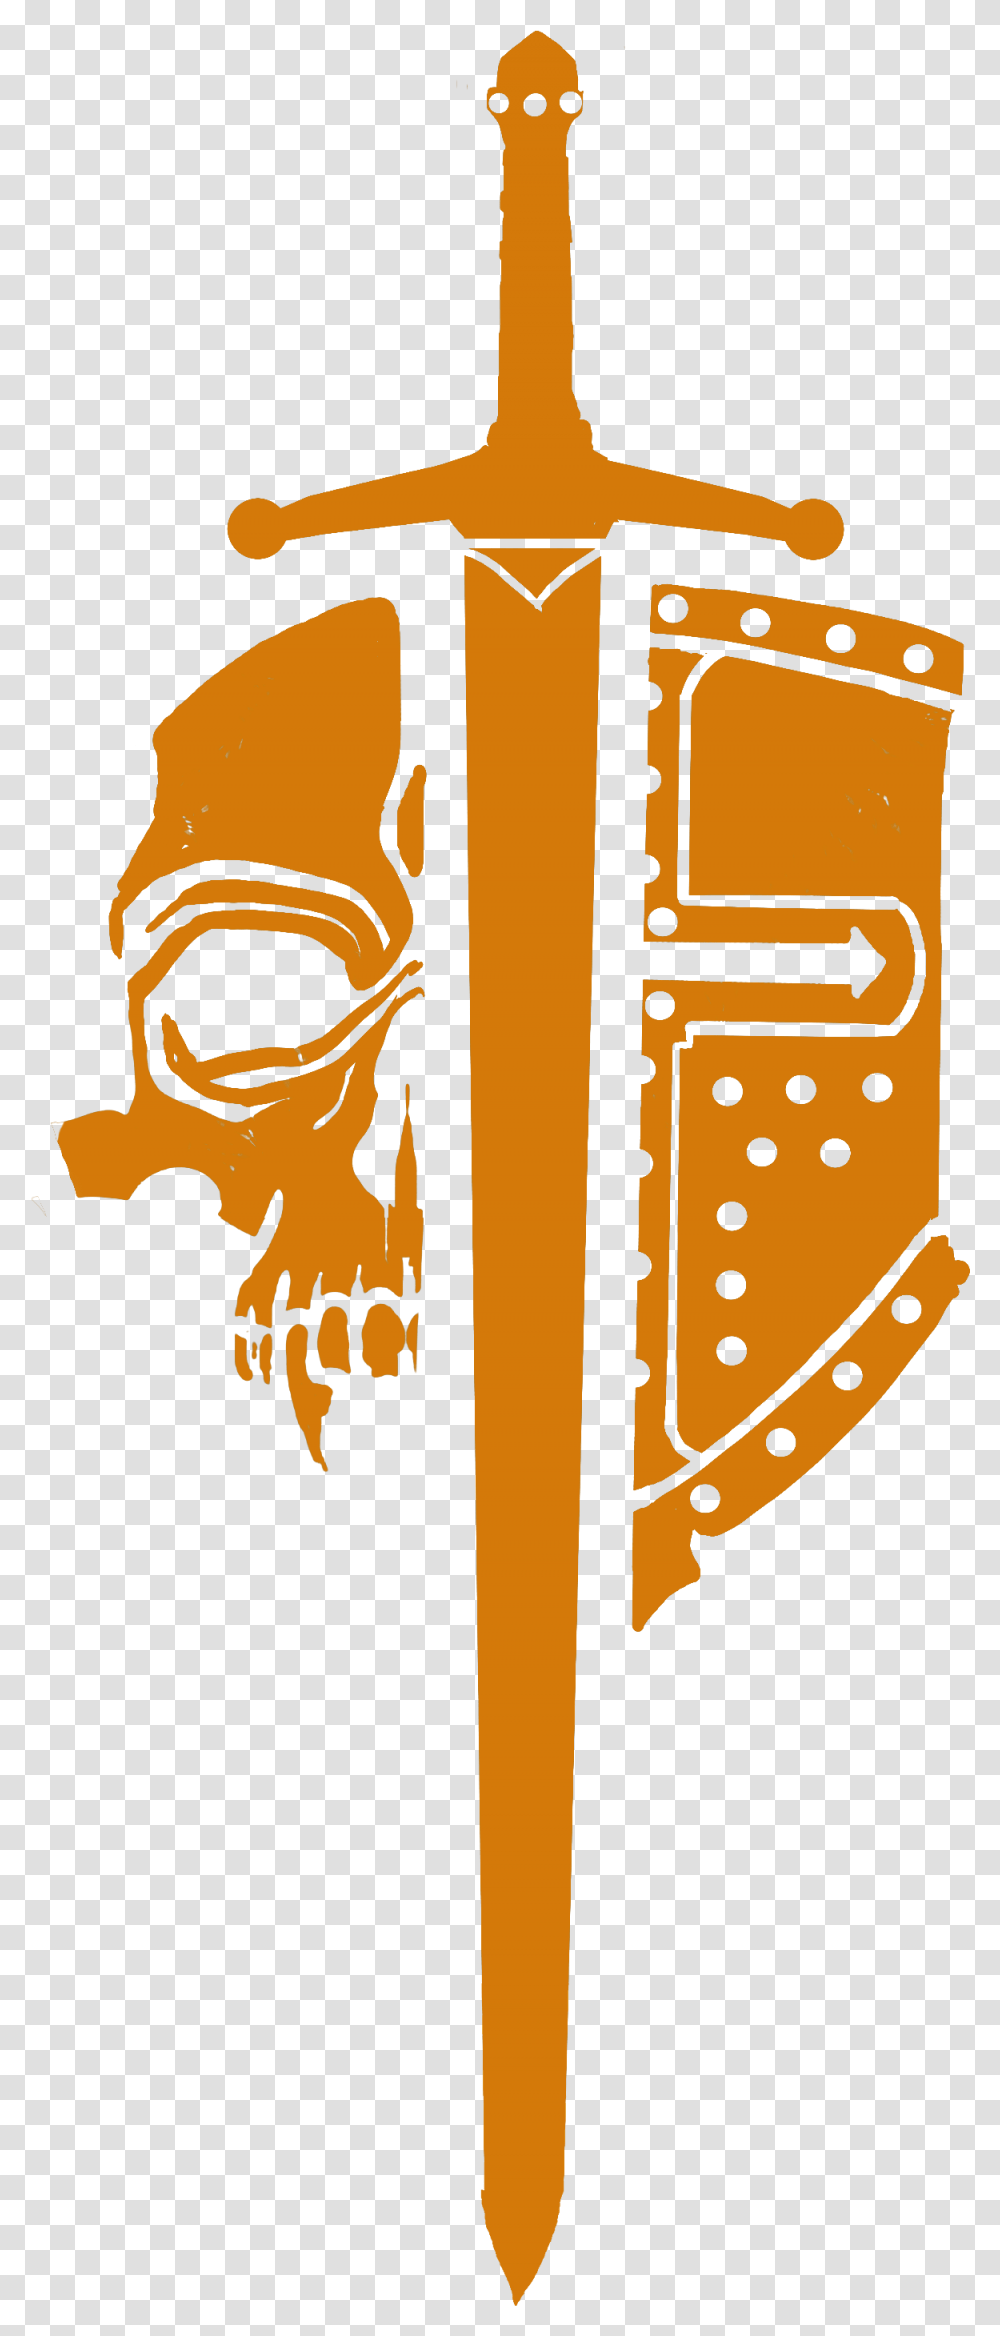 Knight Symbol For Honor Knight For Honor Symbol, Armor, Cross, Shield, Emblem Transparent Png